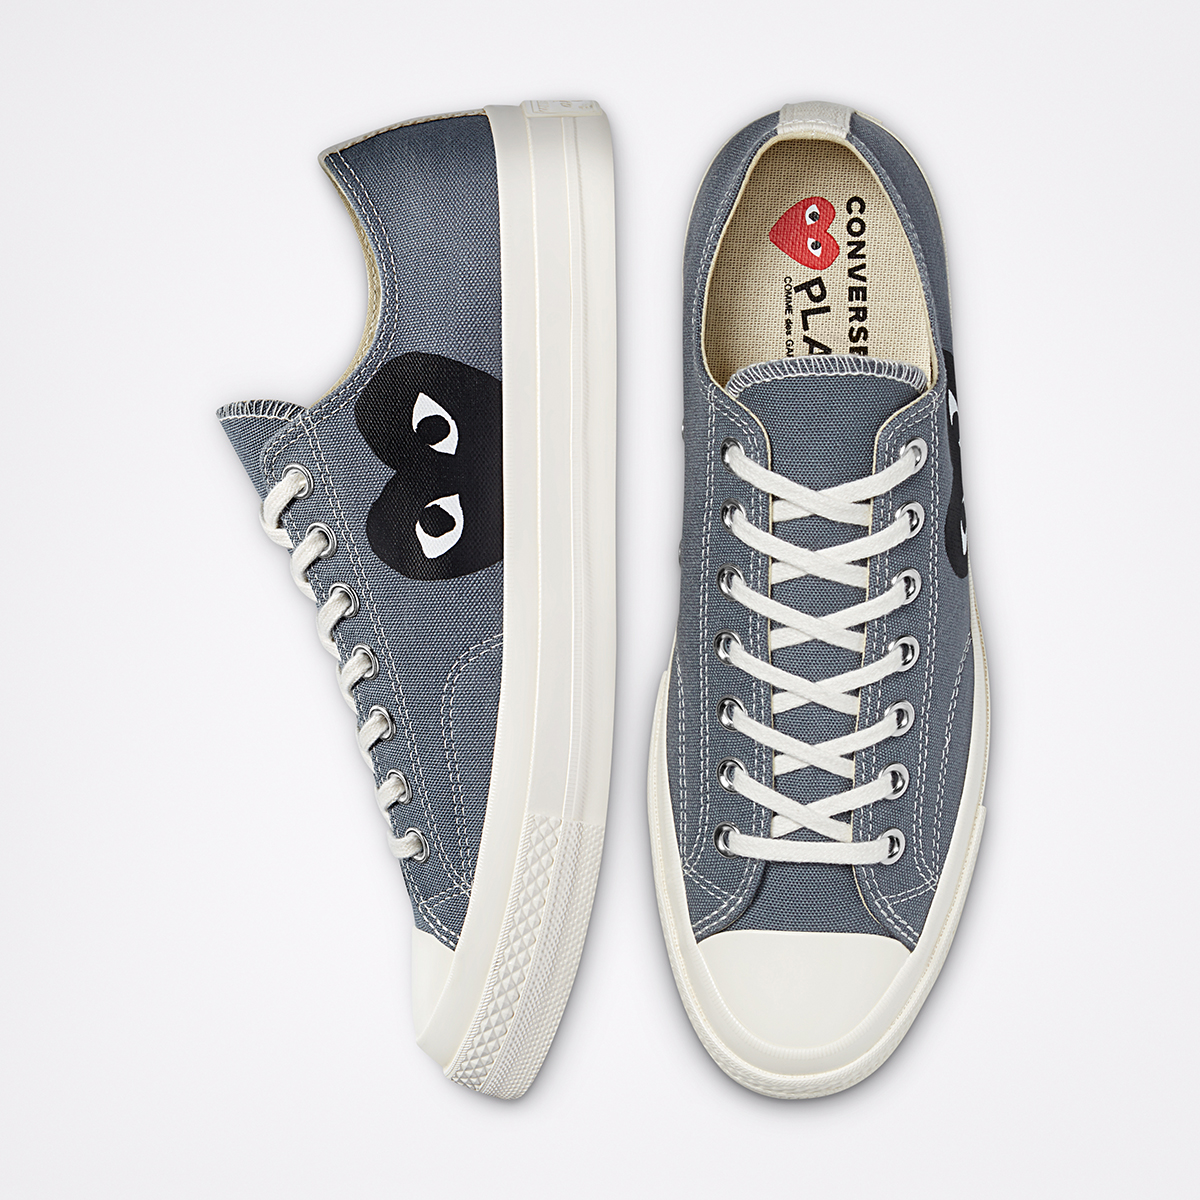 CdG PLAY x Converse Chuck 70 Blue & Gray: Images & Release Info